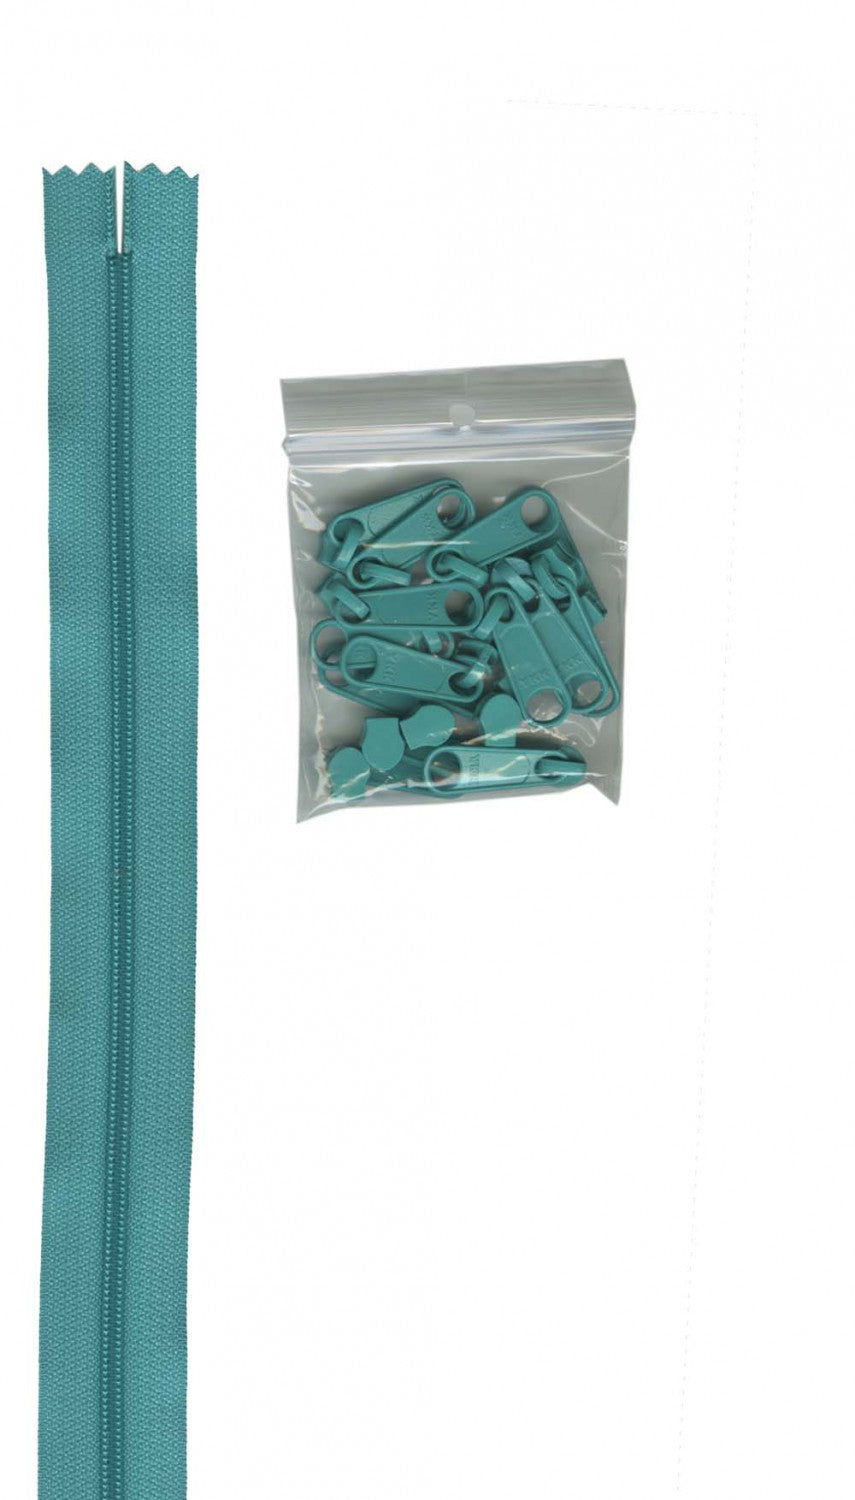 Turquoise #4.5 Nylon Zipper Tape: 4 Yards with 16 Extra-Large Coordinated Pulls from ByAnnie